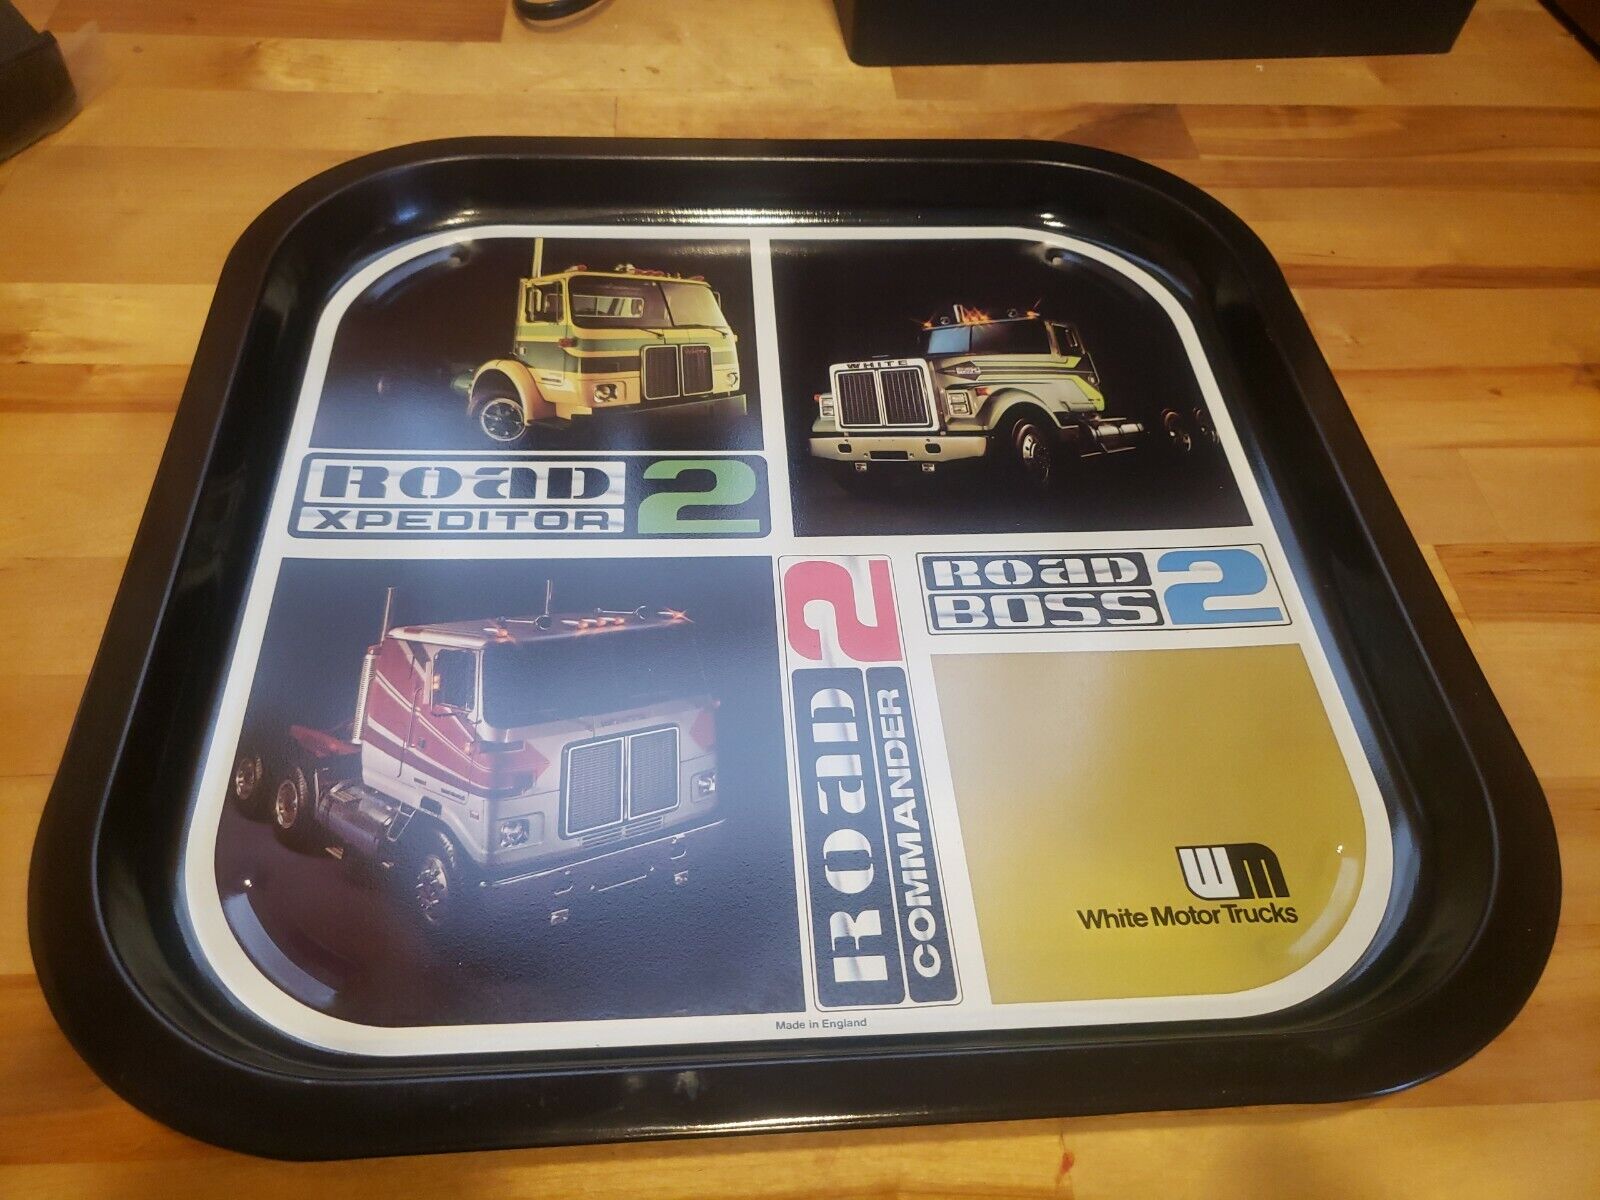 White Road Boss Tractor Trailer Road Commander Road Xpeditor serving tray